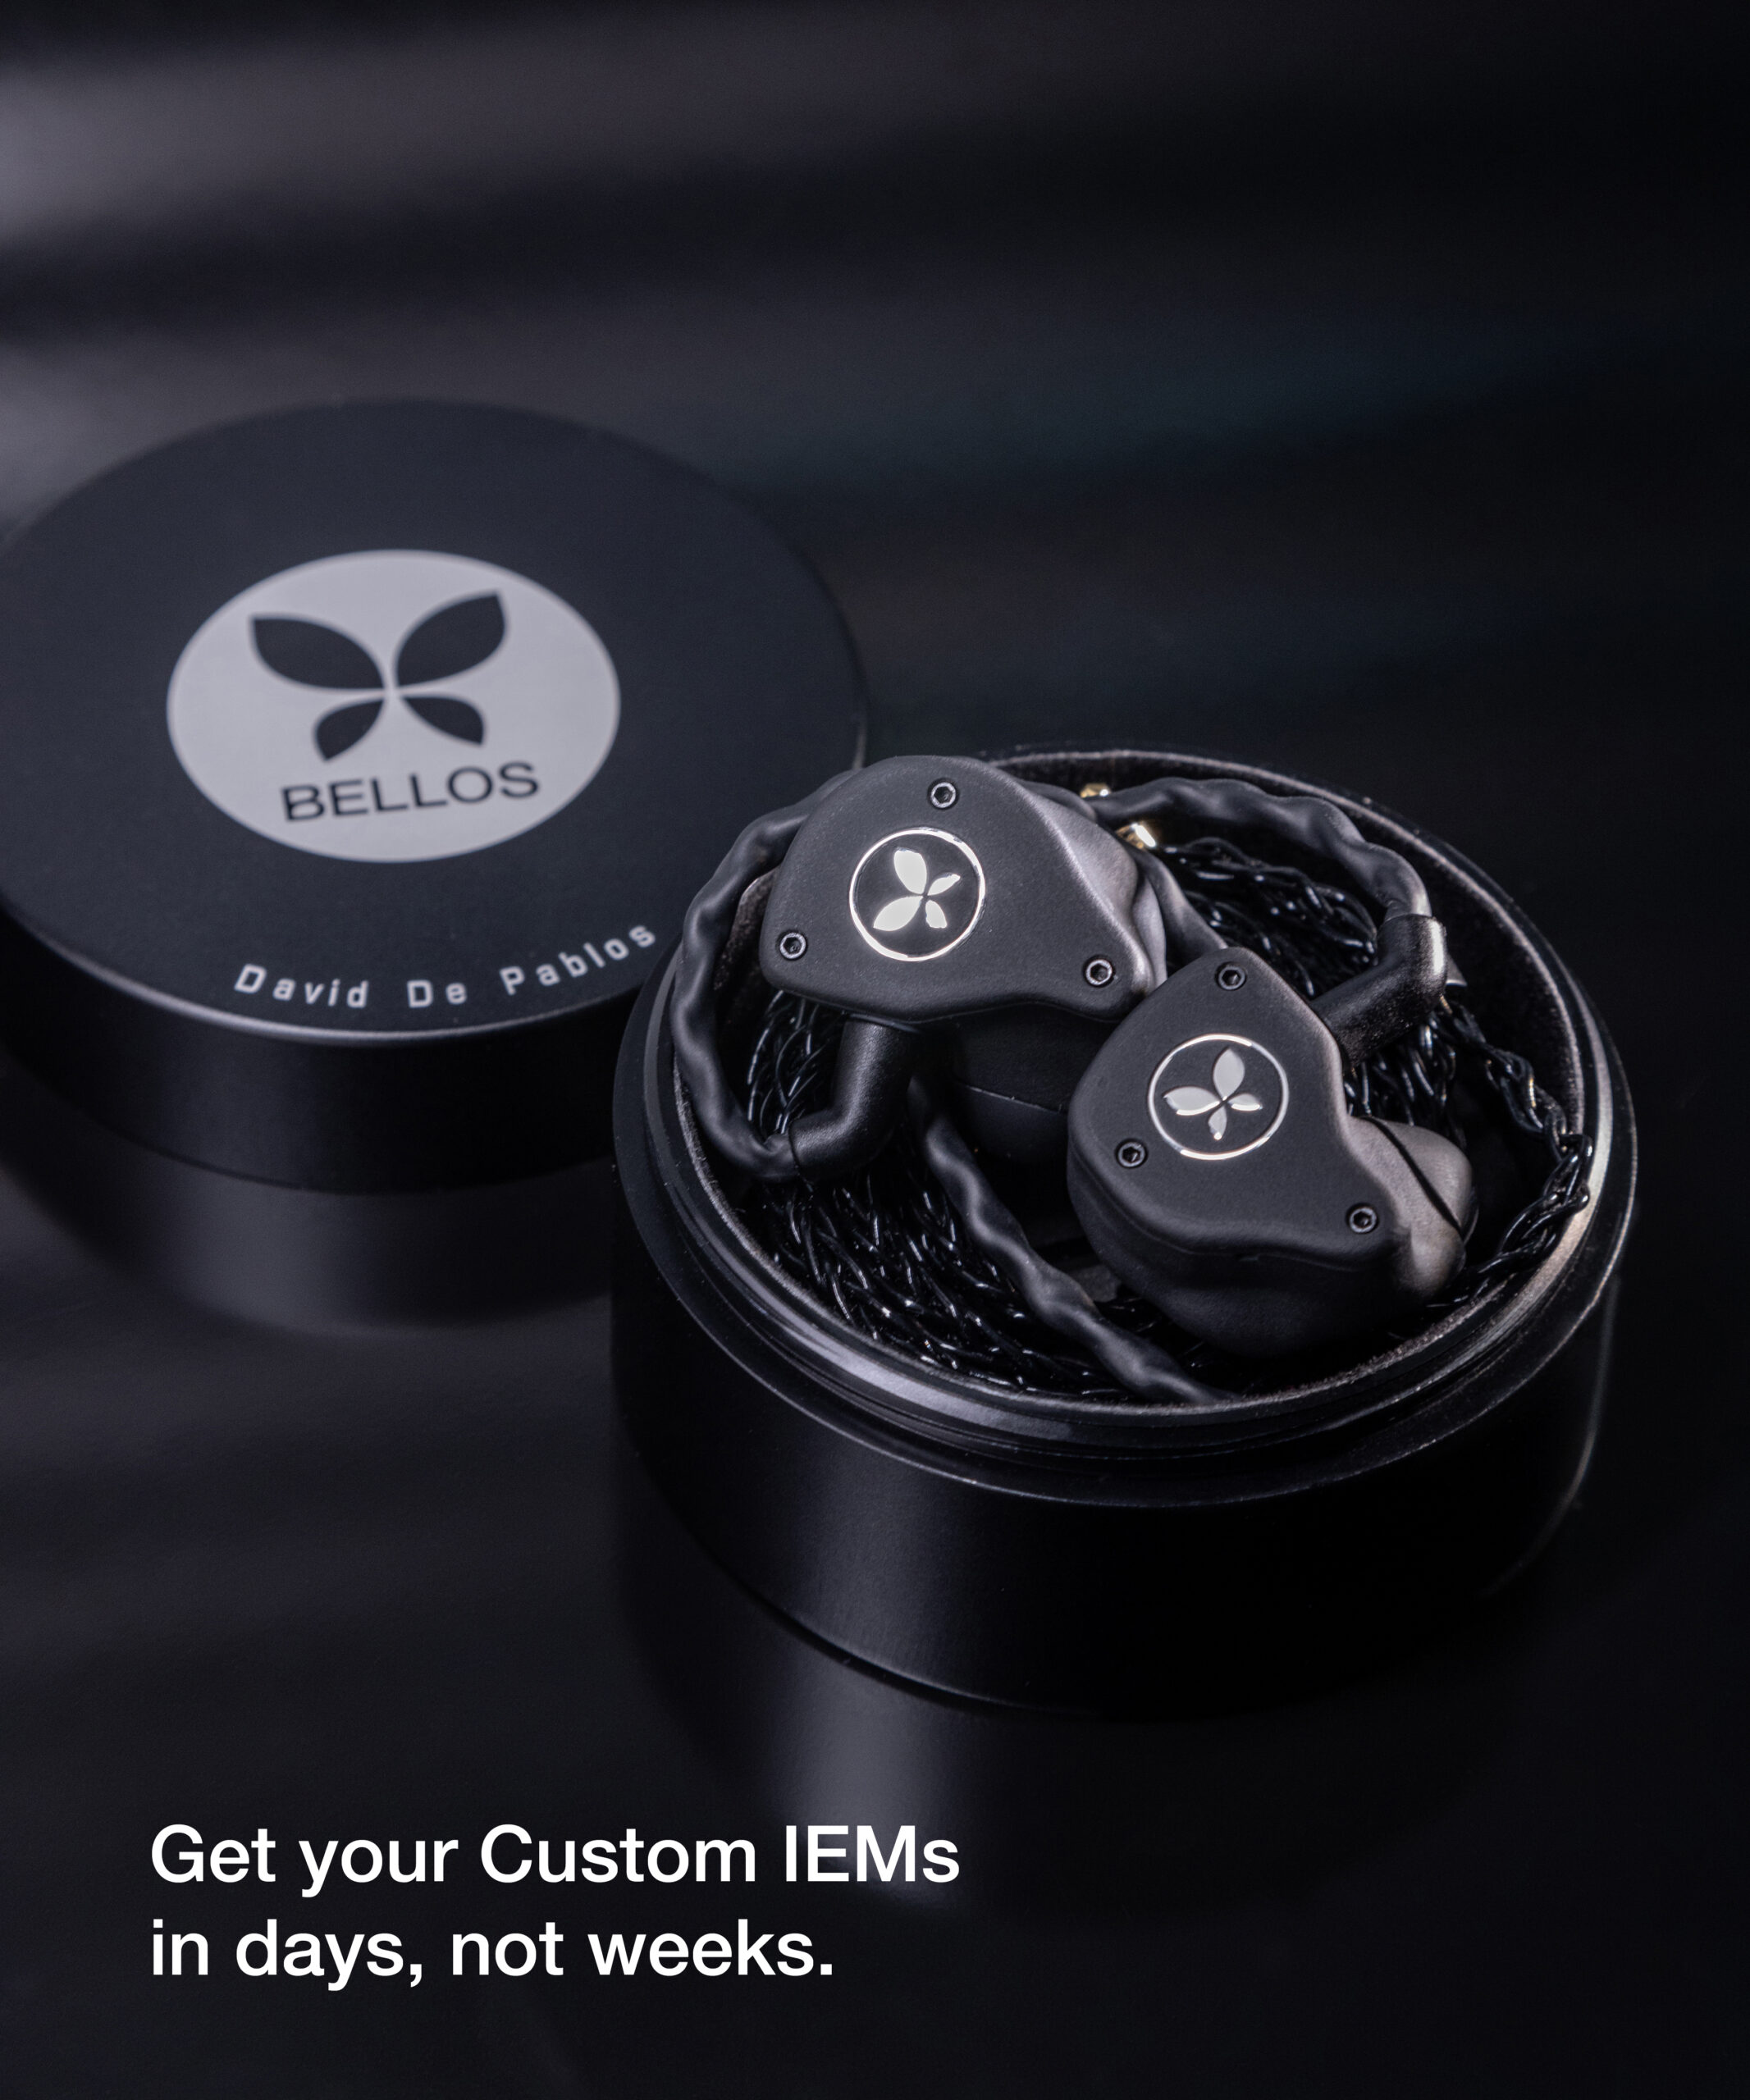 Get Your Custom IEMs in days, not weeks